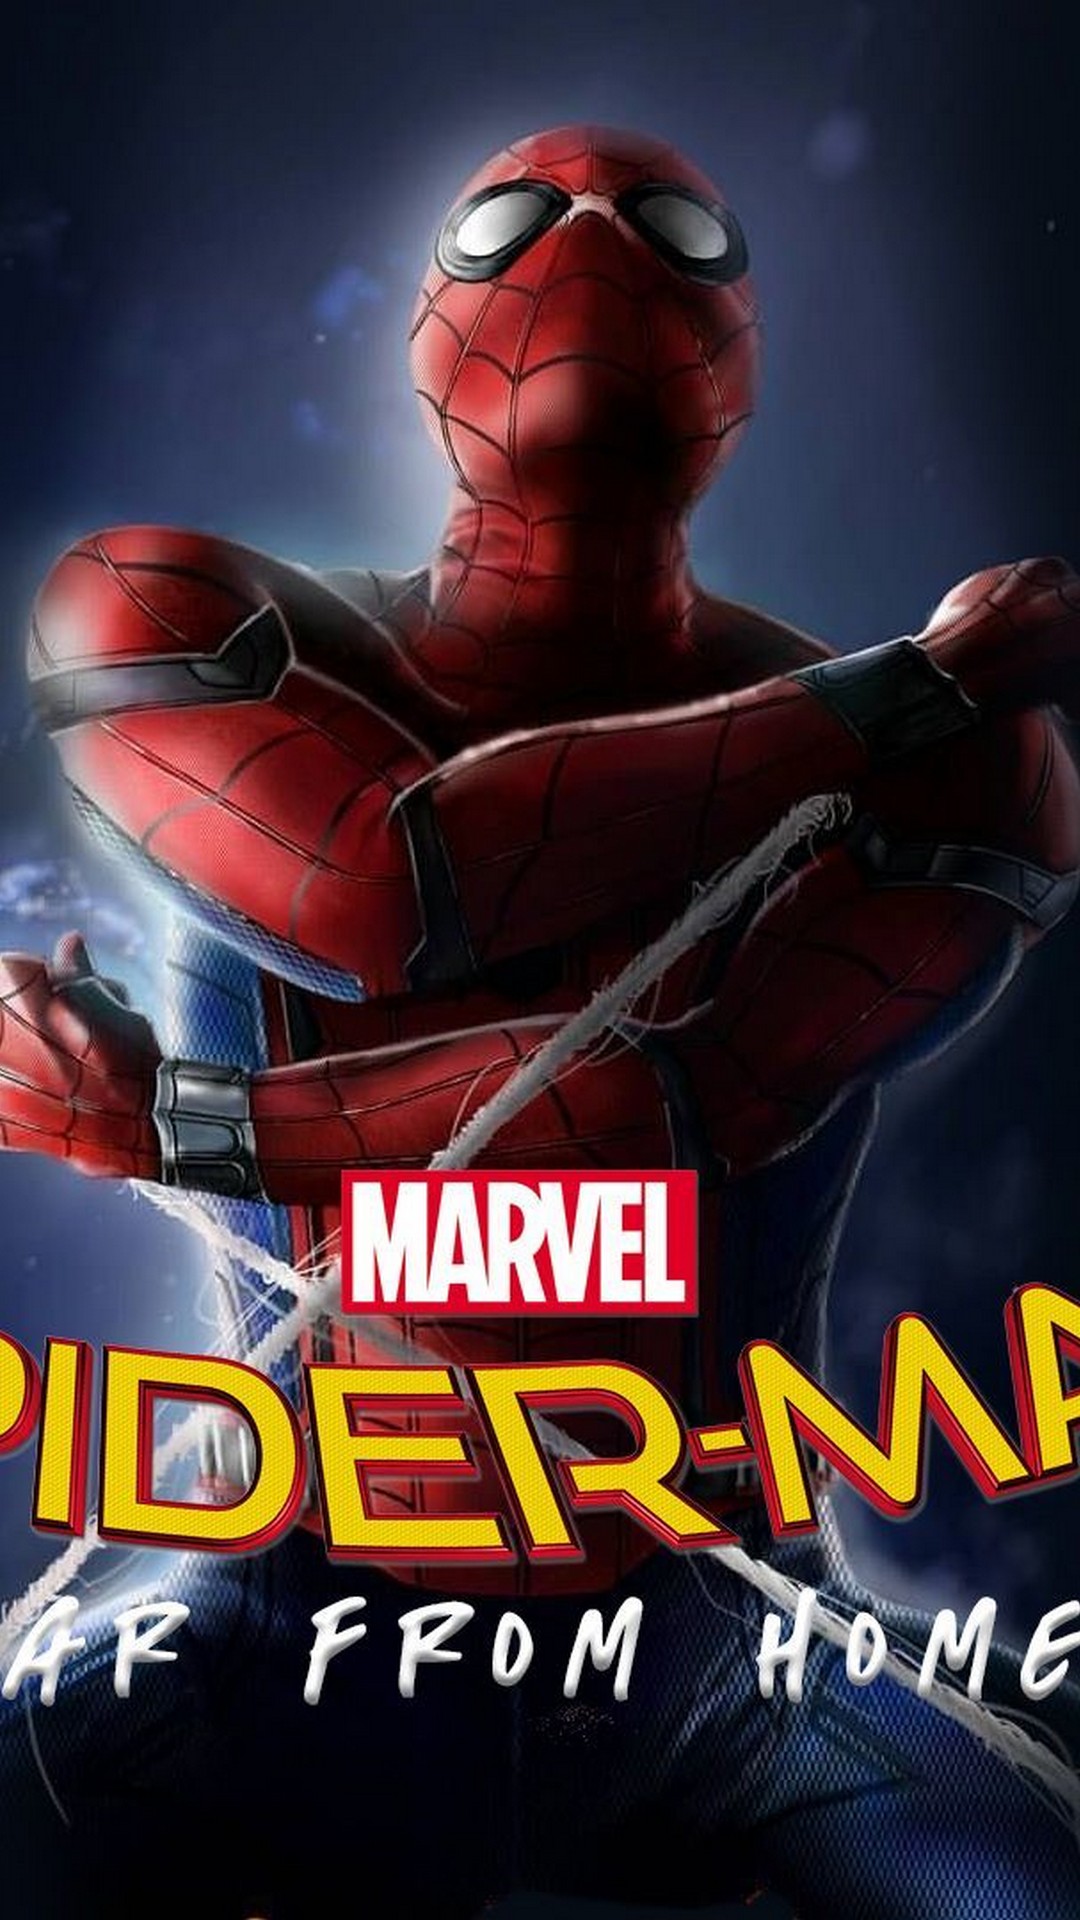 Spider-Man 2019 Far From Home Poster | 2020 Movie Poster Wallpaper HD